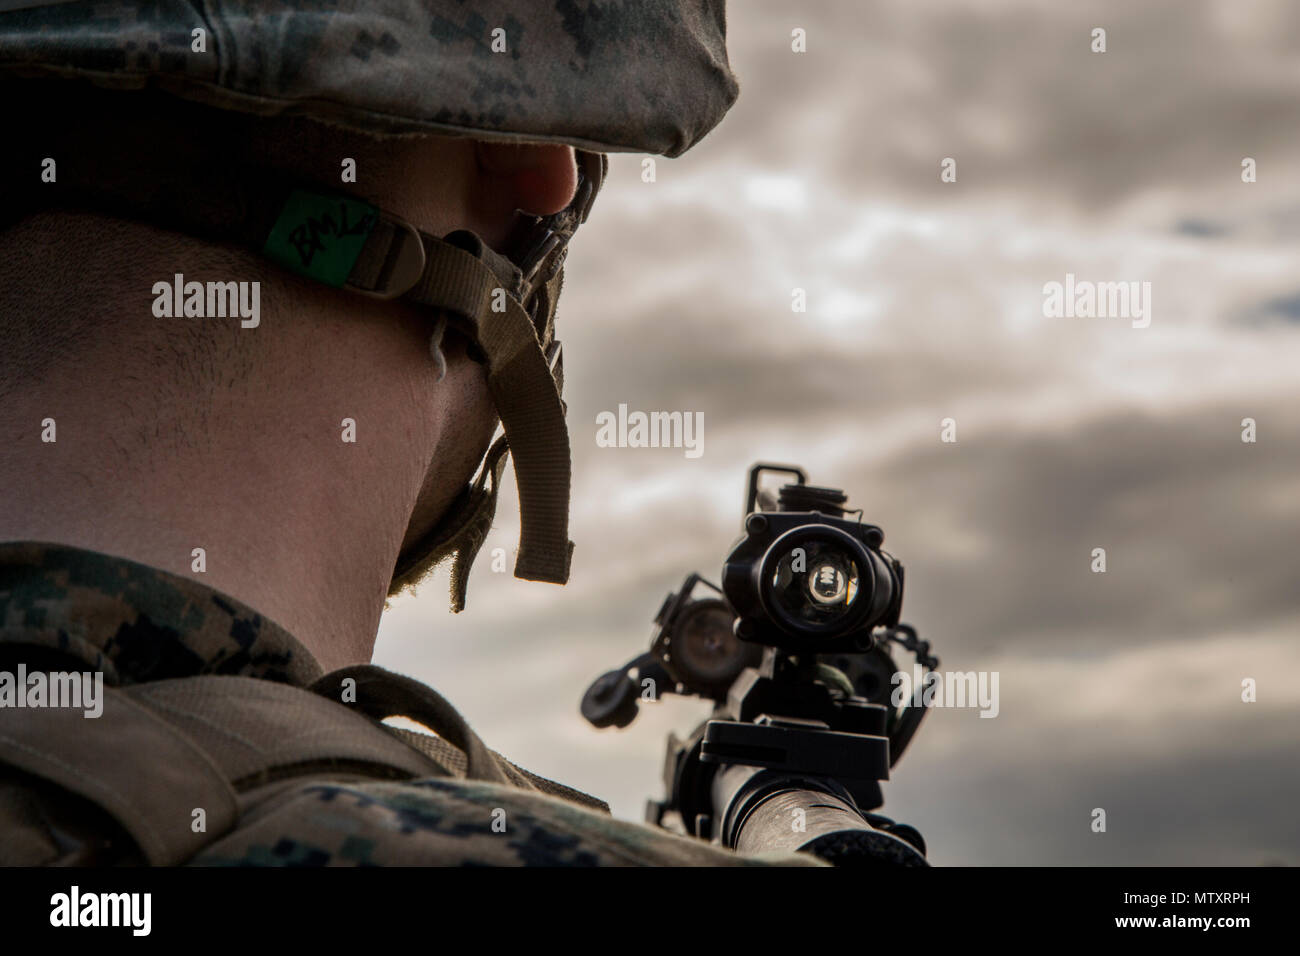 A U.S. Marine with Alpha Company, Infantry Training Battalion (ITB), School of Infantry-East, looks down range after firing a M-203 grenade launcher during a live fire range at Camp Lejeune, N.C., Jan. 12, 2017. Marines with Alpha Company conducted a live fire range as part of their qualification with the M-203 grenade launcher. (U.S. Marine Corps photo by Cpl. Manuel A. Serrano) Stock Photo